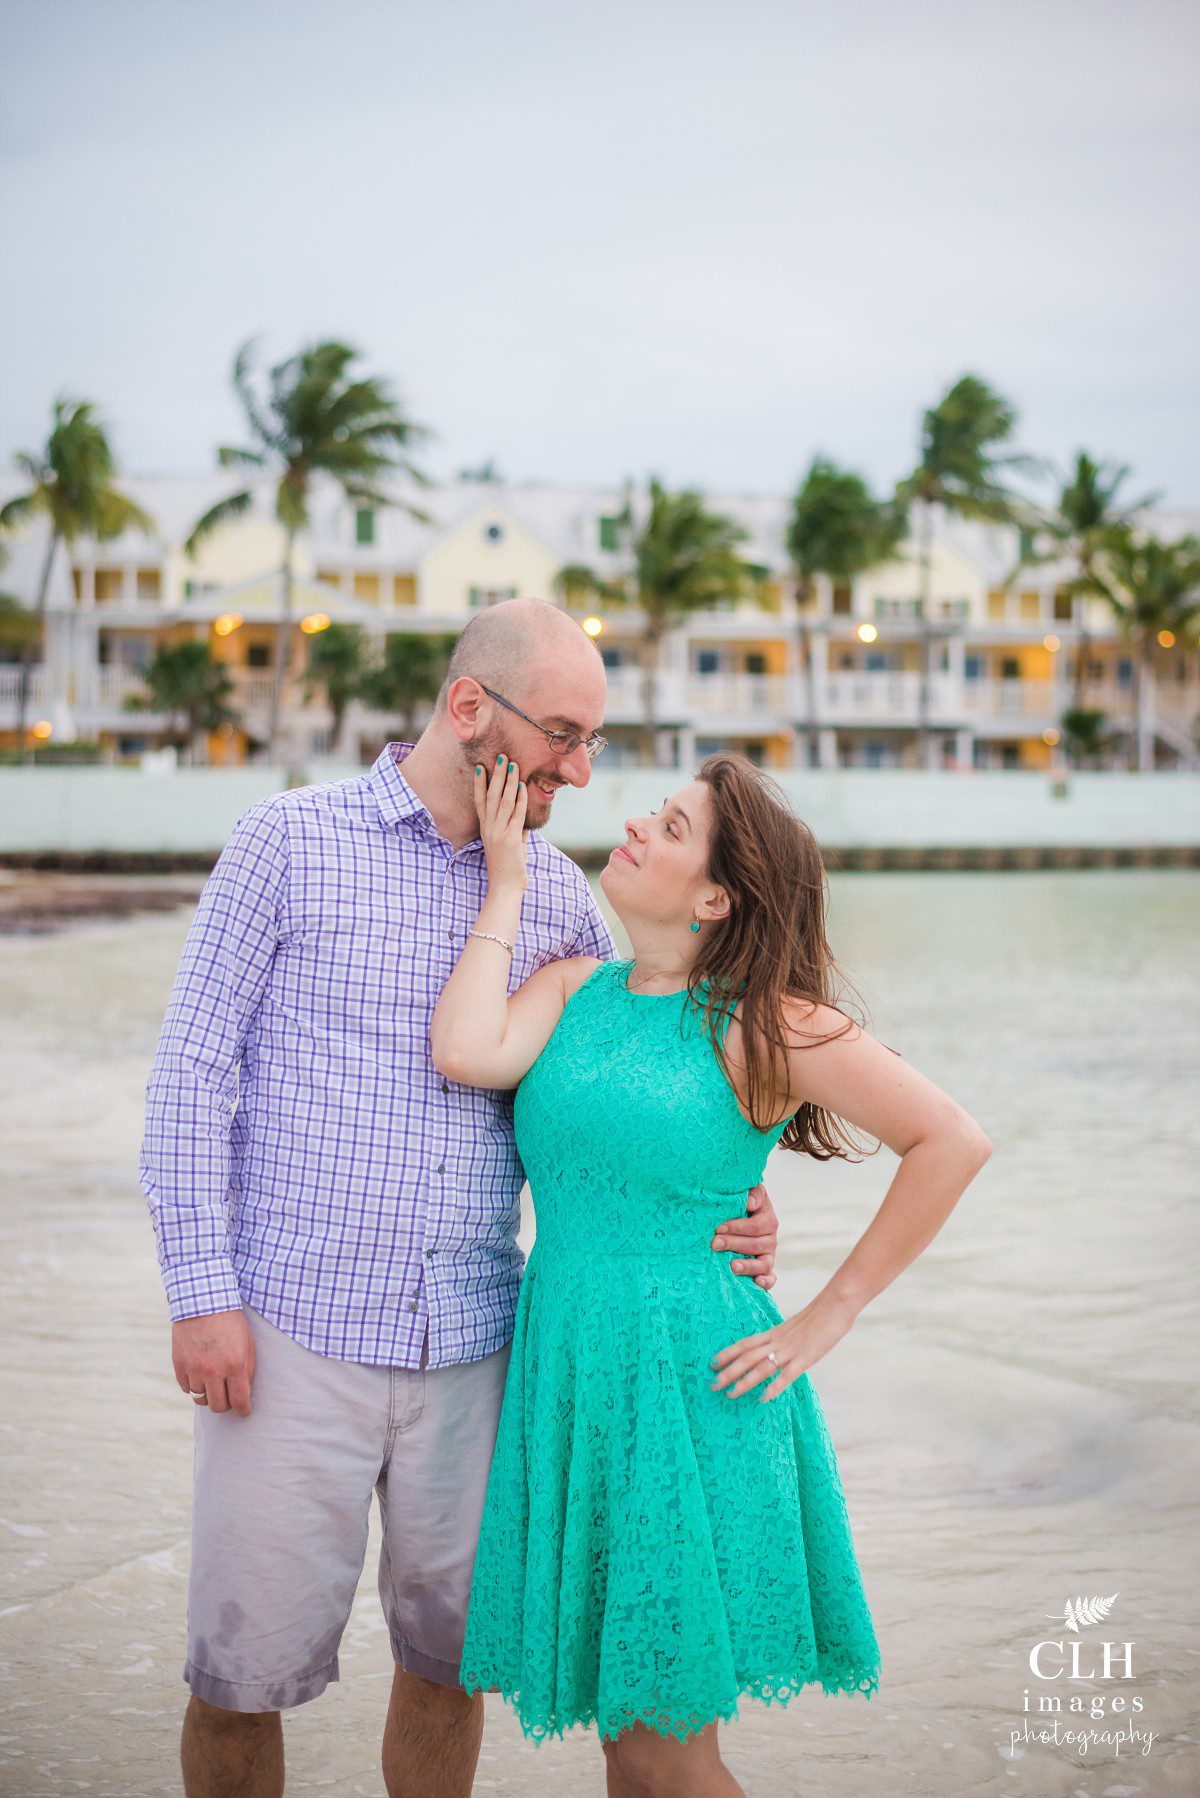 CLH images Photography - Sunrise Beach Session - Key West Photographer - Couples Beach Photography - Florida Photographer - Key West Photos - South Beach Key West (14)